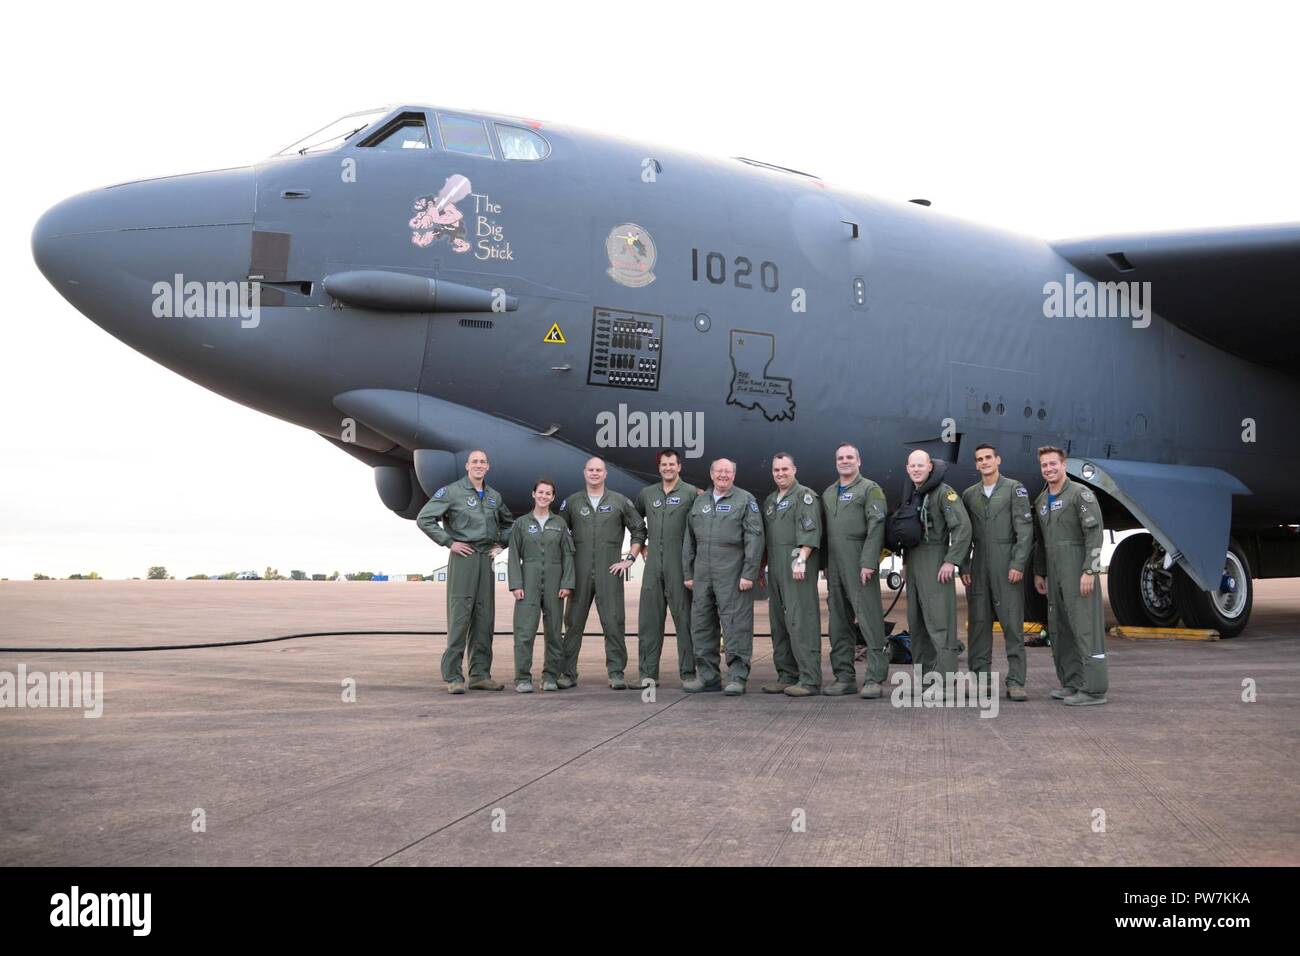 A B-52 Stratofortress aircrew poses for a photo after landing at Fairford Royal Air Force Base, Sept. 22, 2017. The aircrew participated in SERPENTEX 17, a coalition exercise that brought teams together from the U.S., U.K., France and Canada. Stock Photo